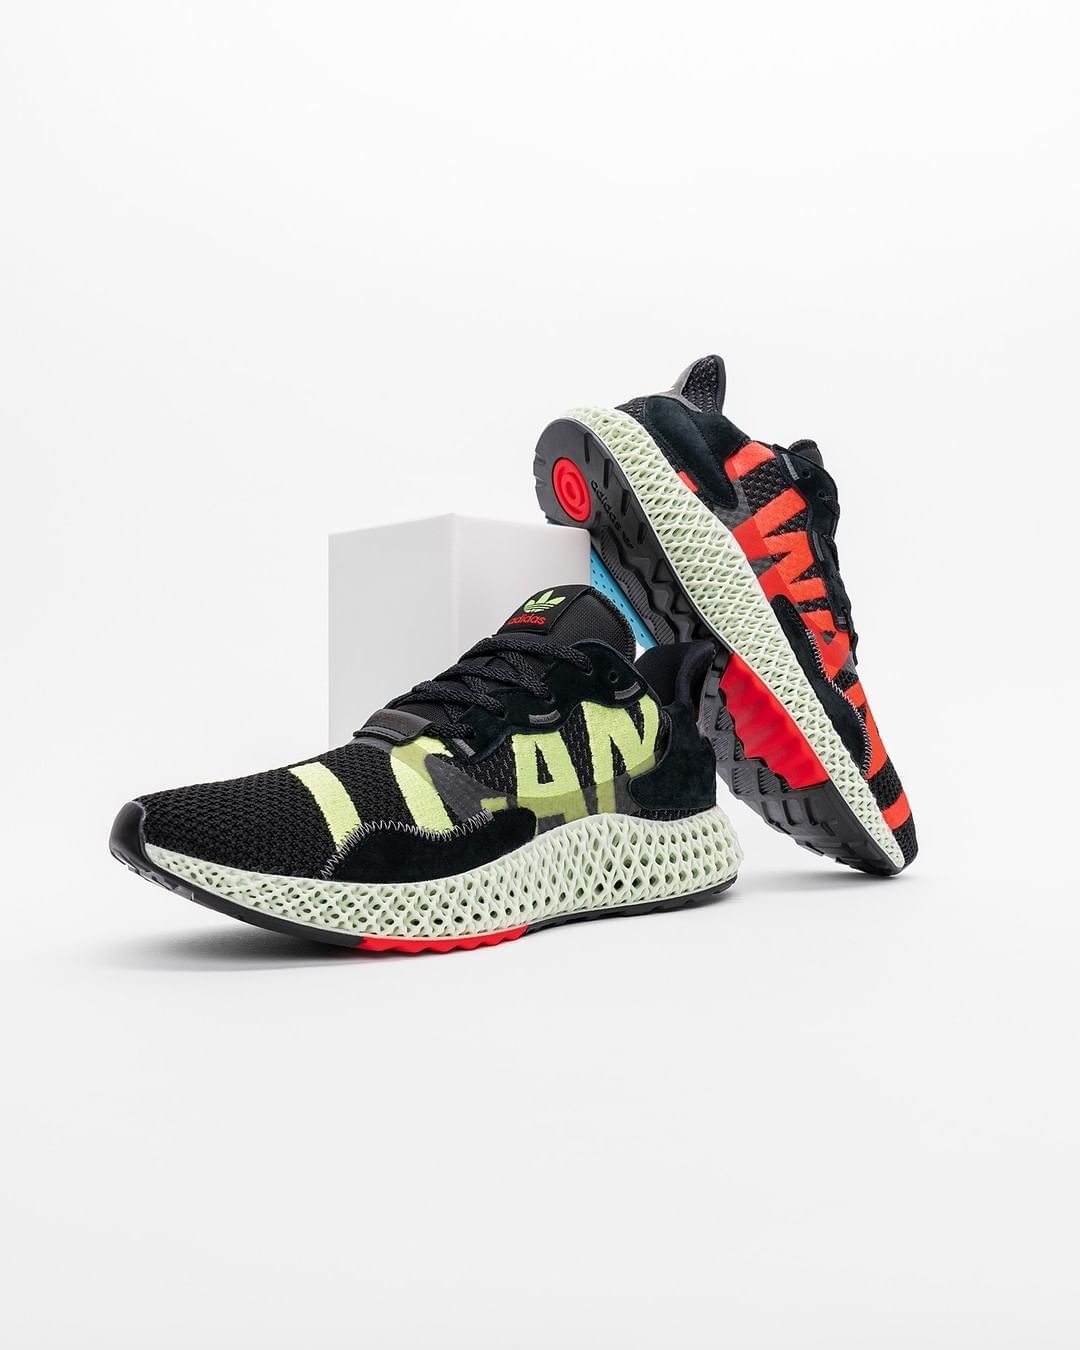 adidas zx4000 4d iwant ican